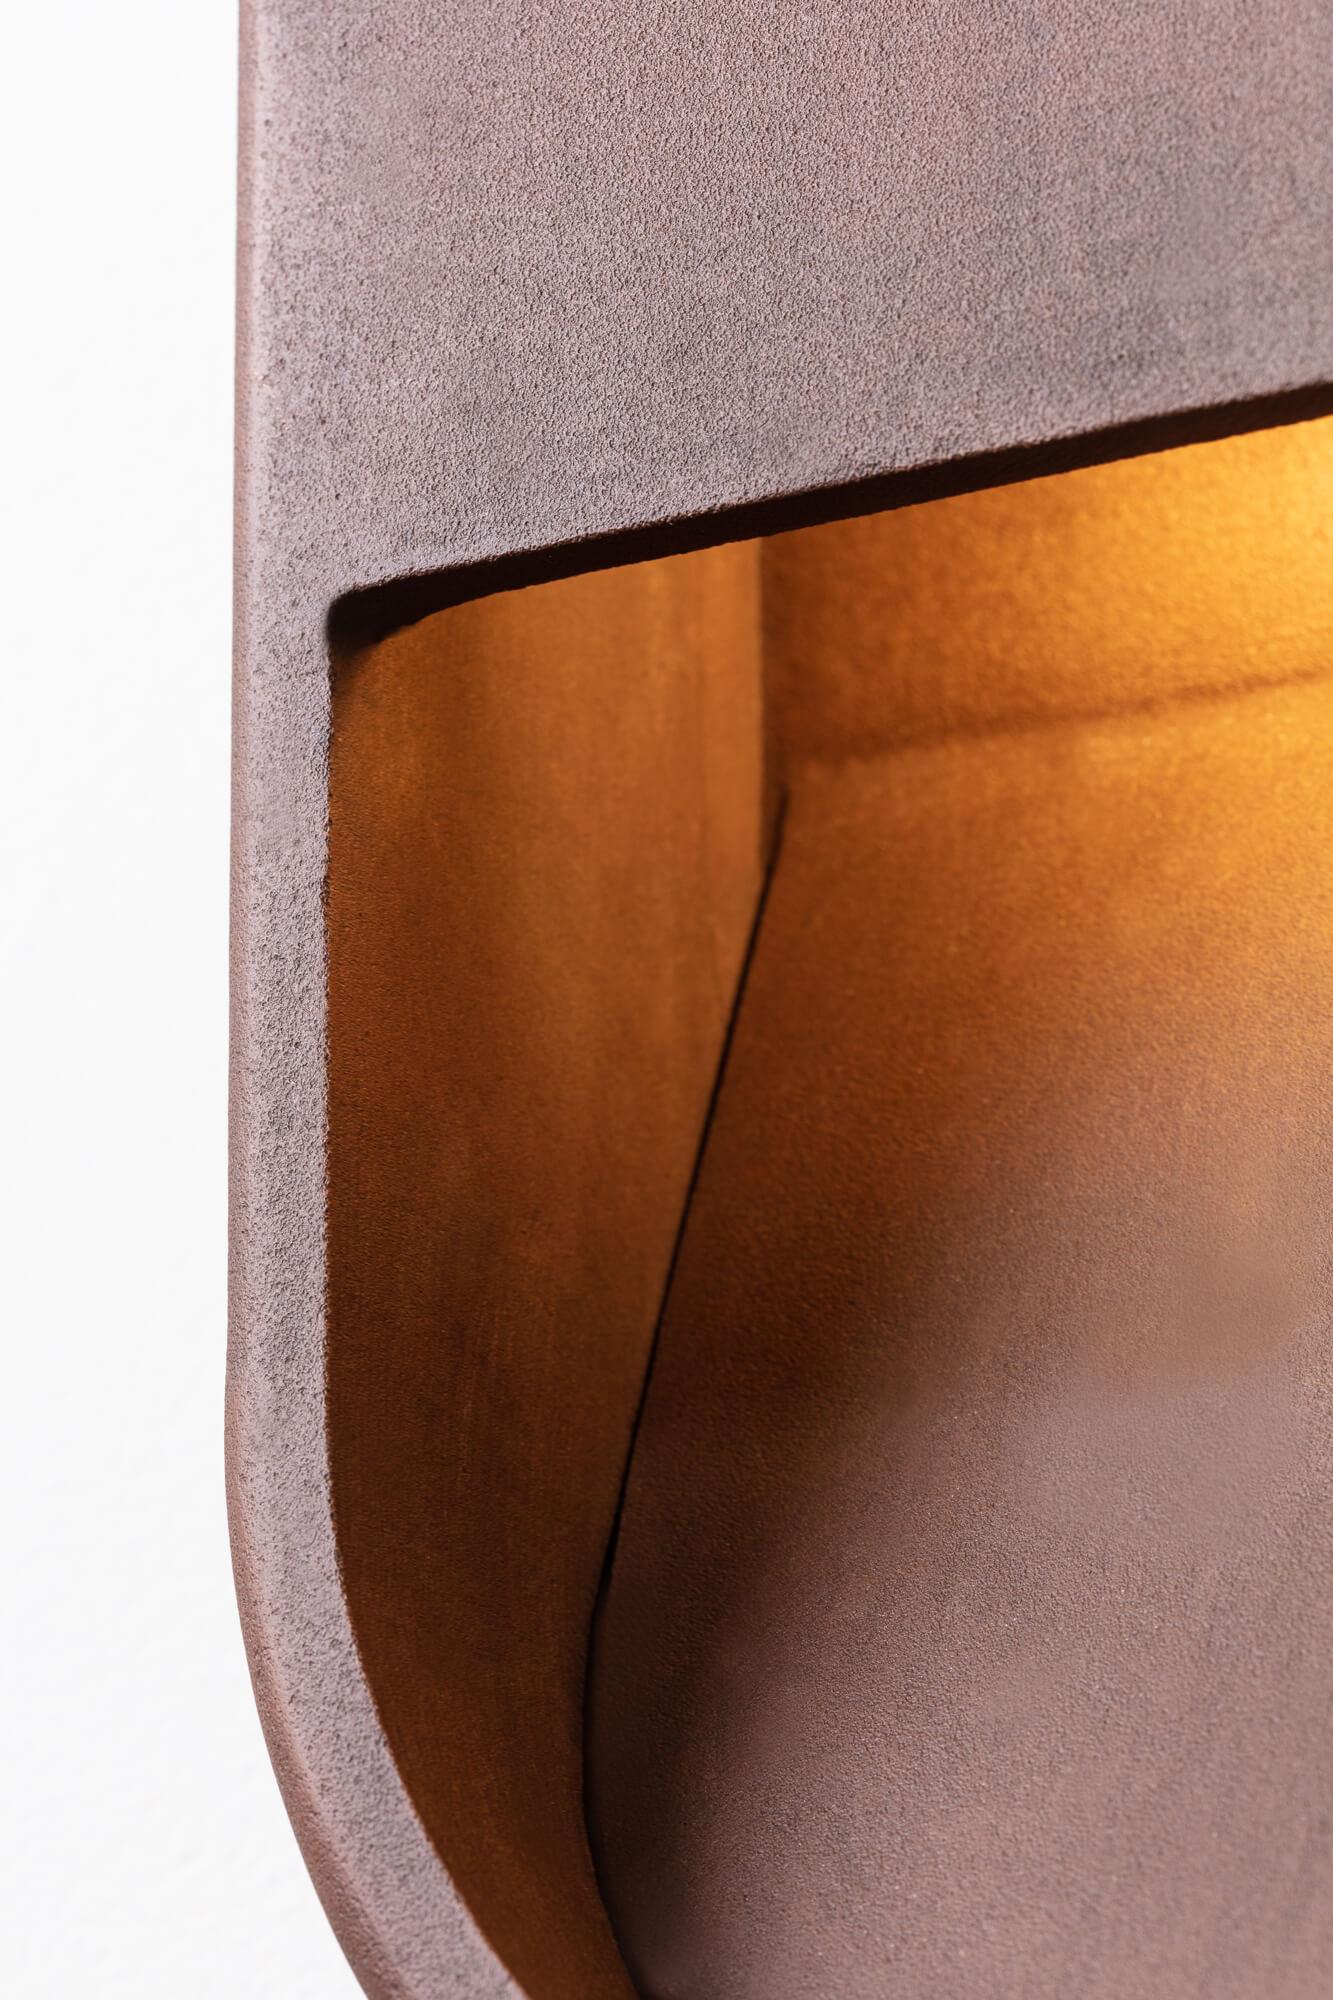 Kyoto is a unique outdoor/indoor lamp collection. Sand cast in aluminum. Finish options are satin aluminum, matte black, ore, bronze. The sconces are handmade sculptures that are resistant to the elements.

Each piece is individually sand casted and